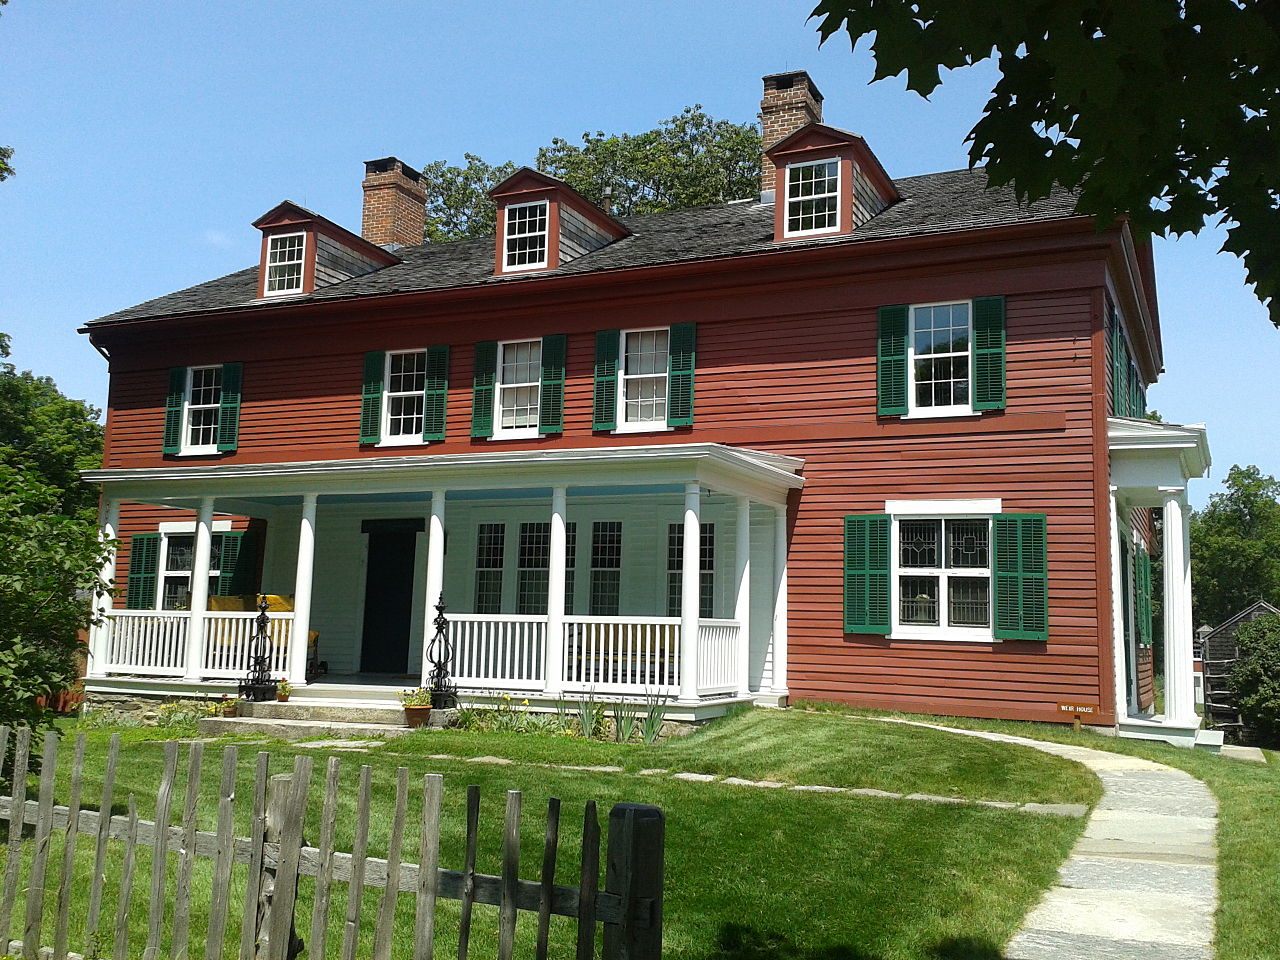 The front of the Weir House. The two-story home features reddish brown siding and green shutters. There is a white covered porch along about one third of the house. Small chimneys and dormers are featured on the sloped, black roof. A flat front yard is enclosed with a wooden fence.